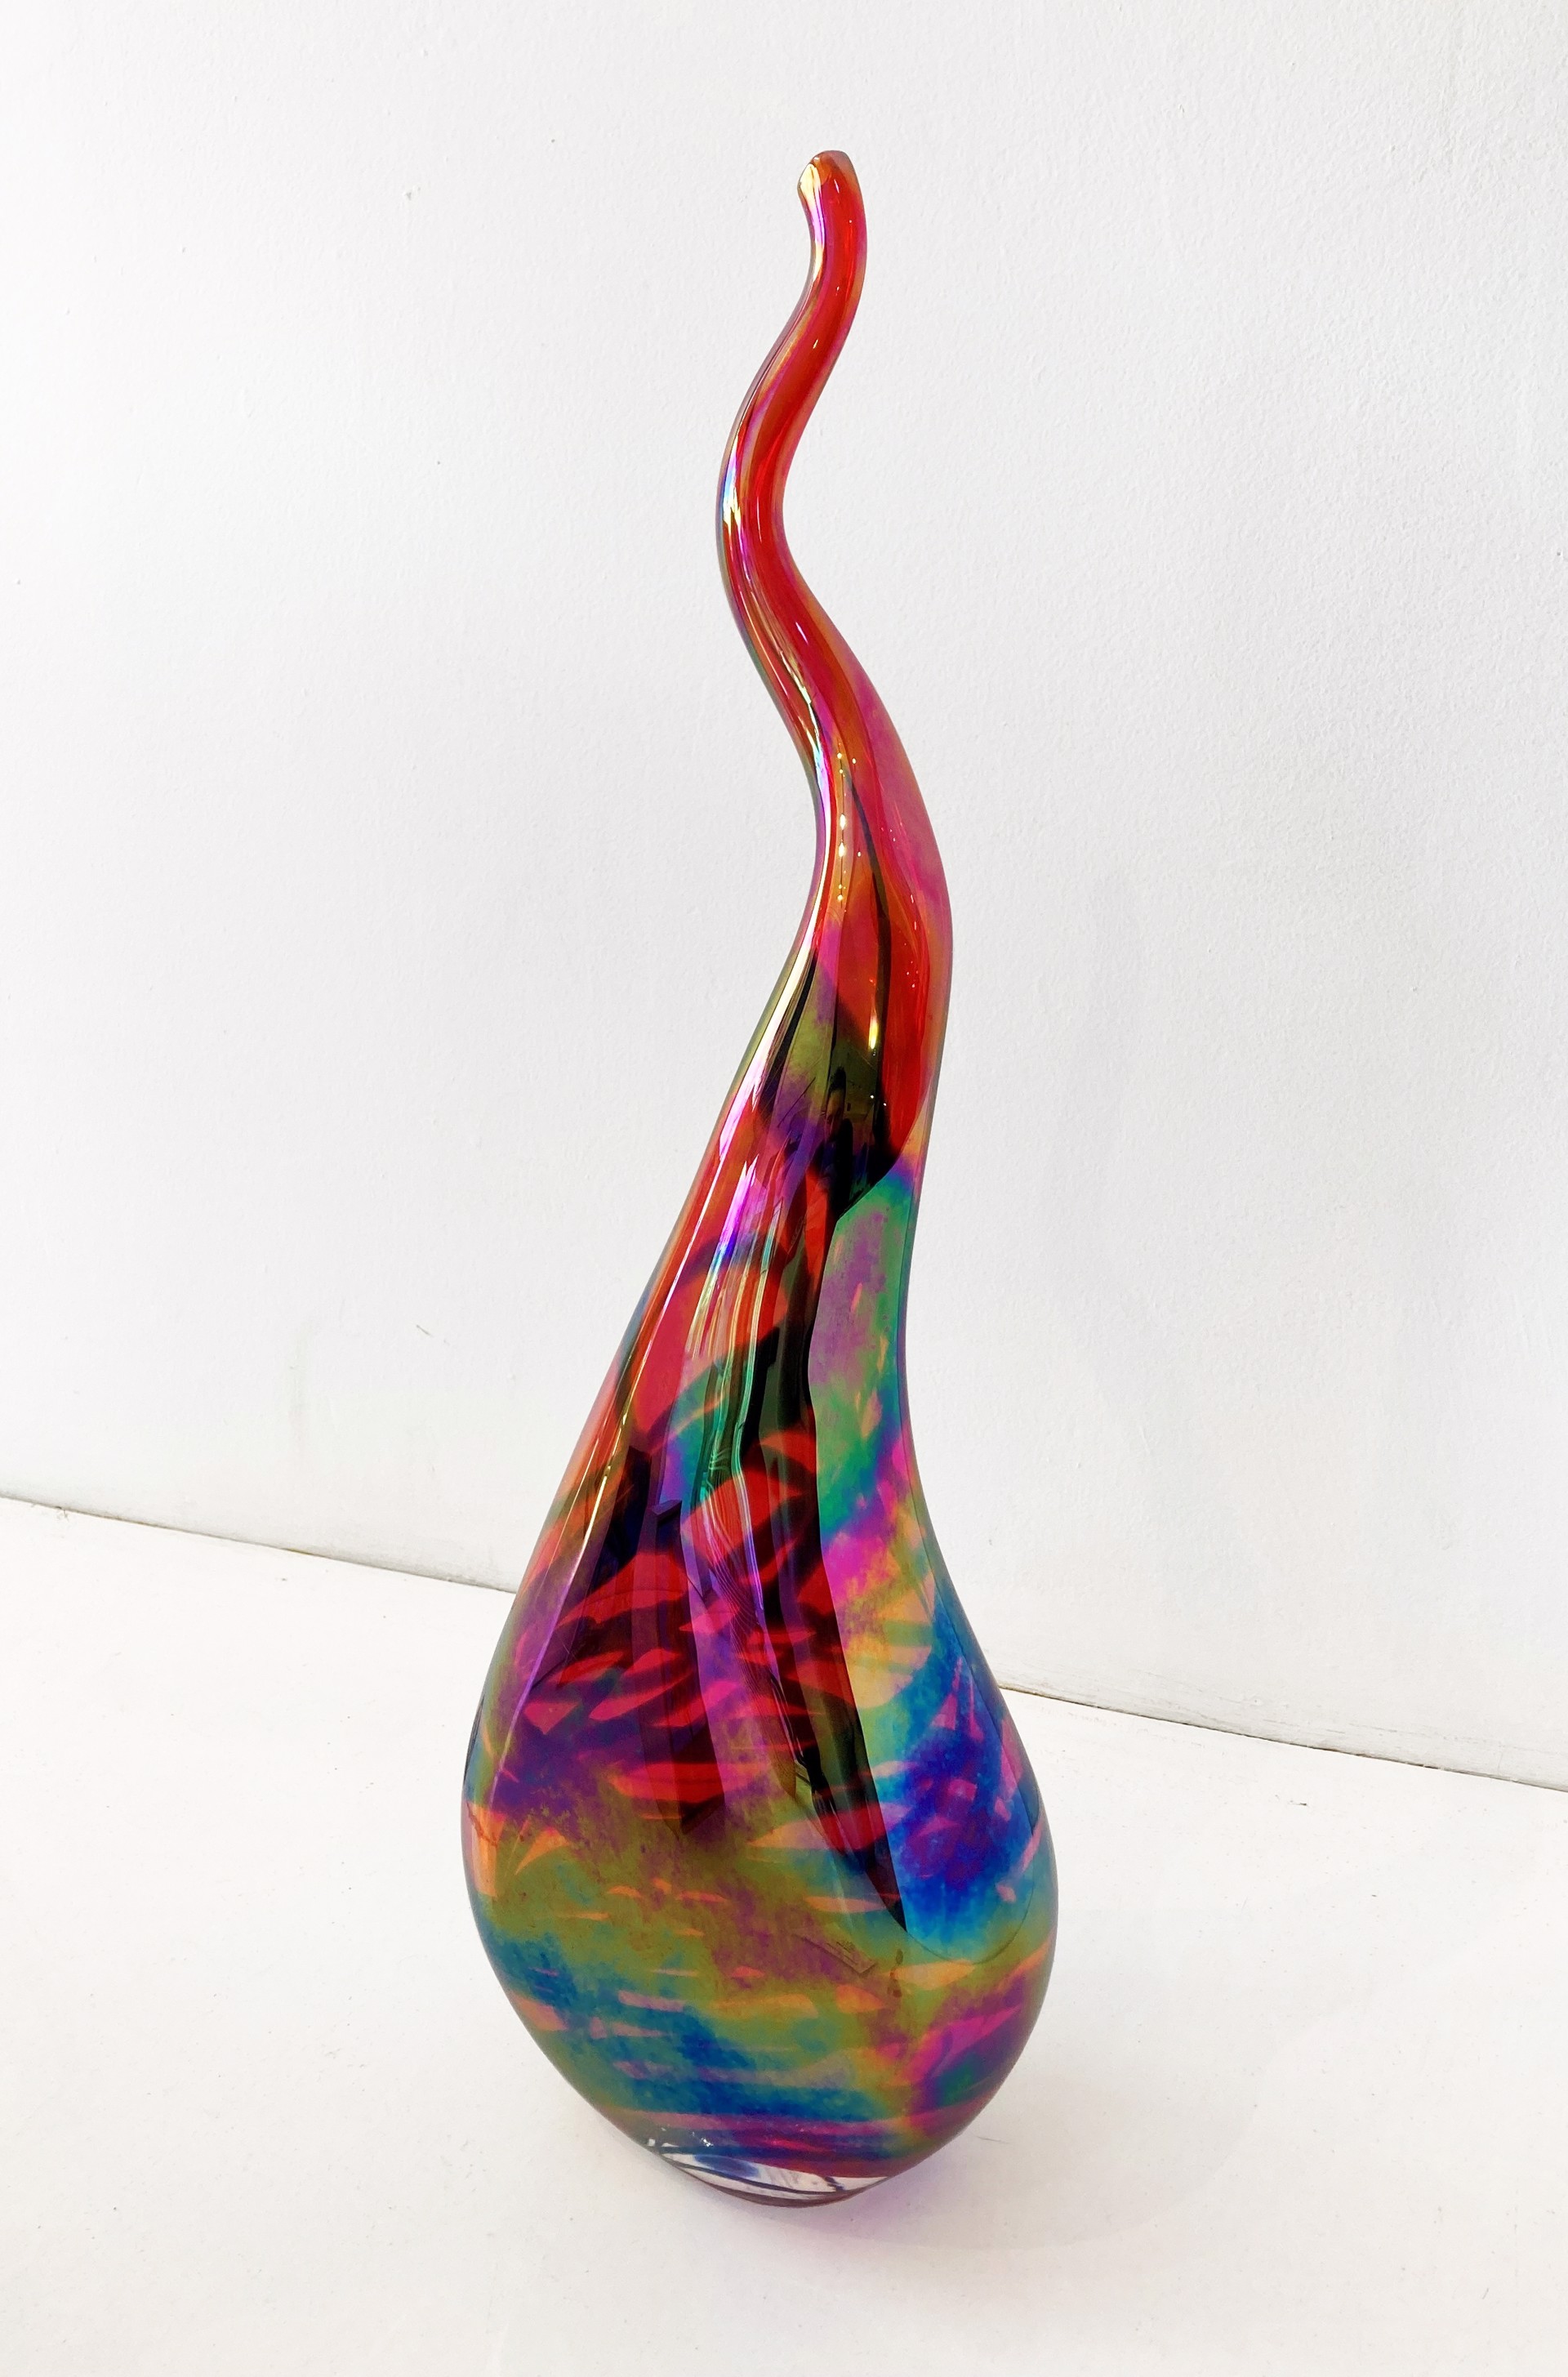 Fumed Flame by Tyler Kimball